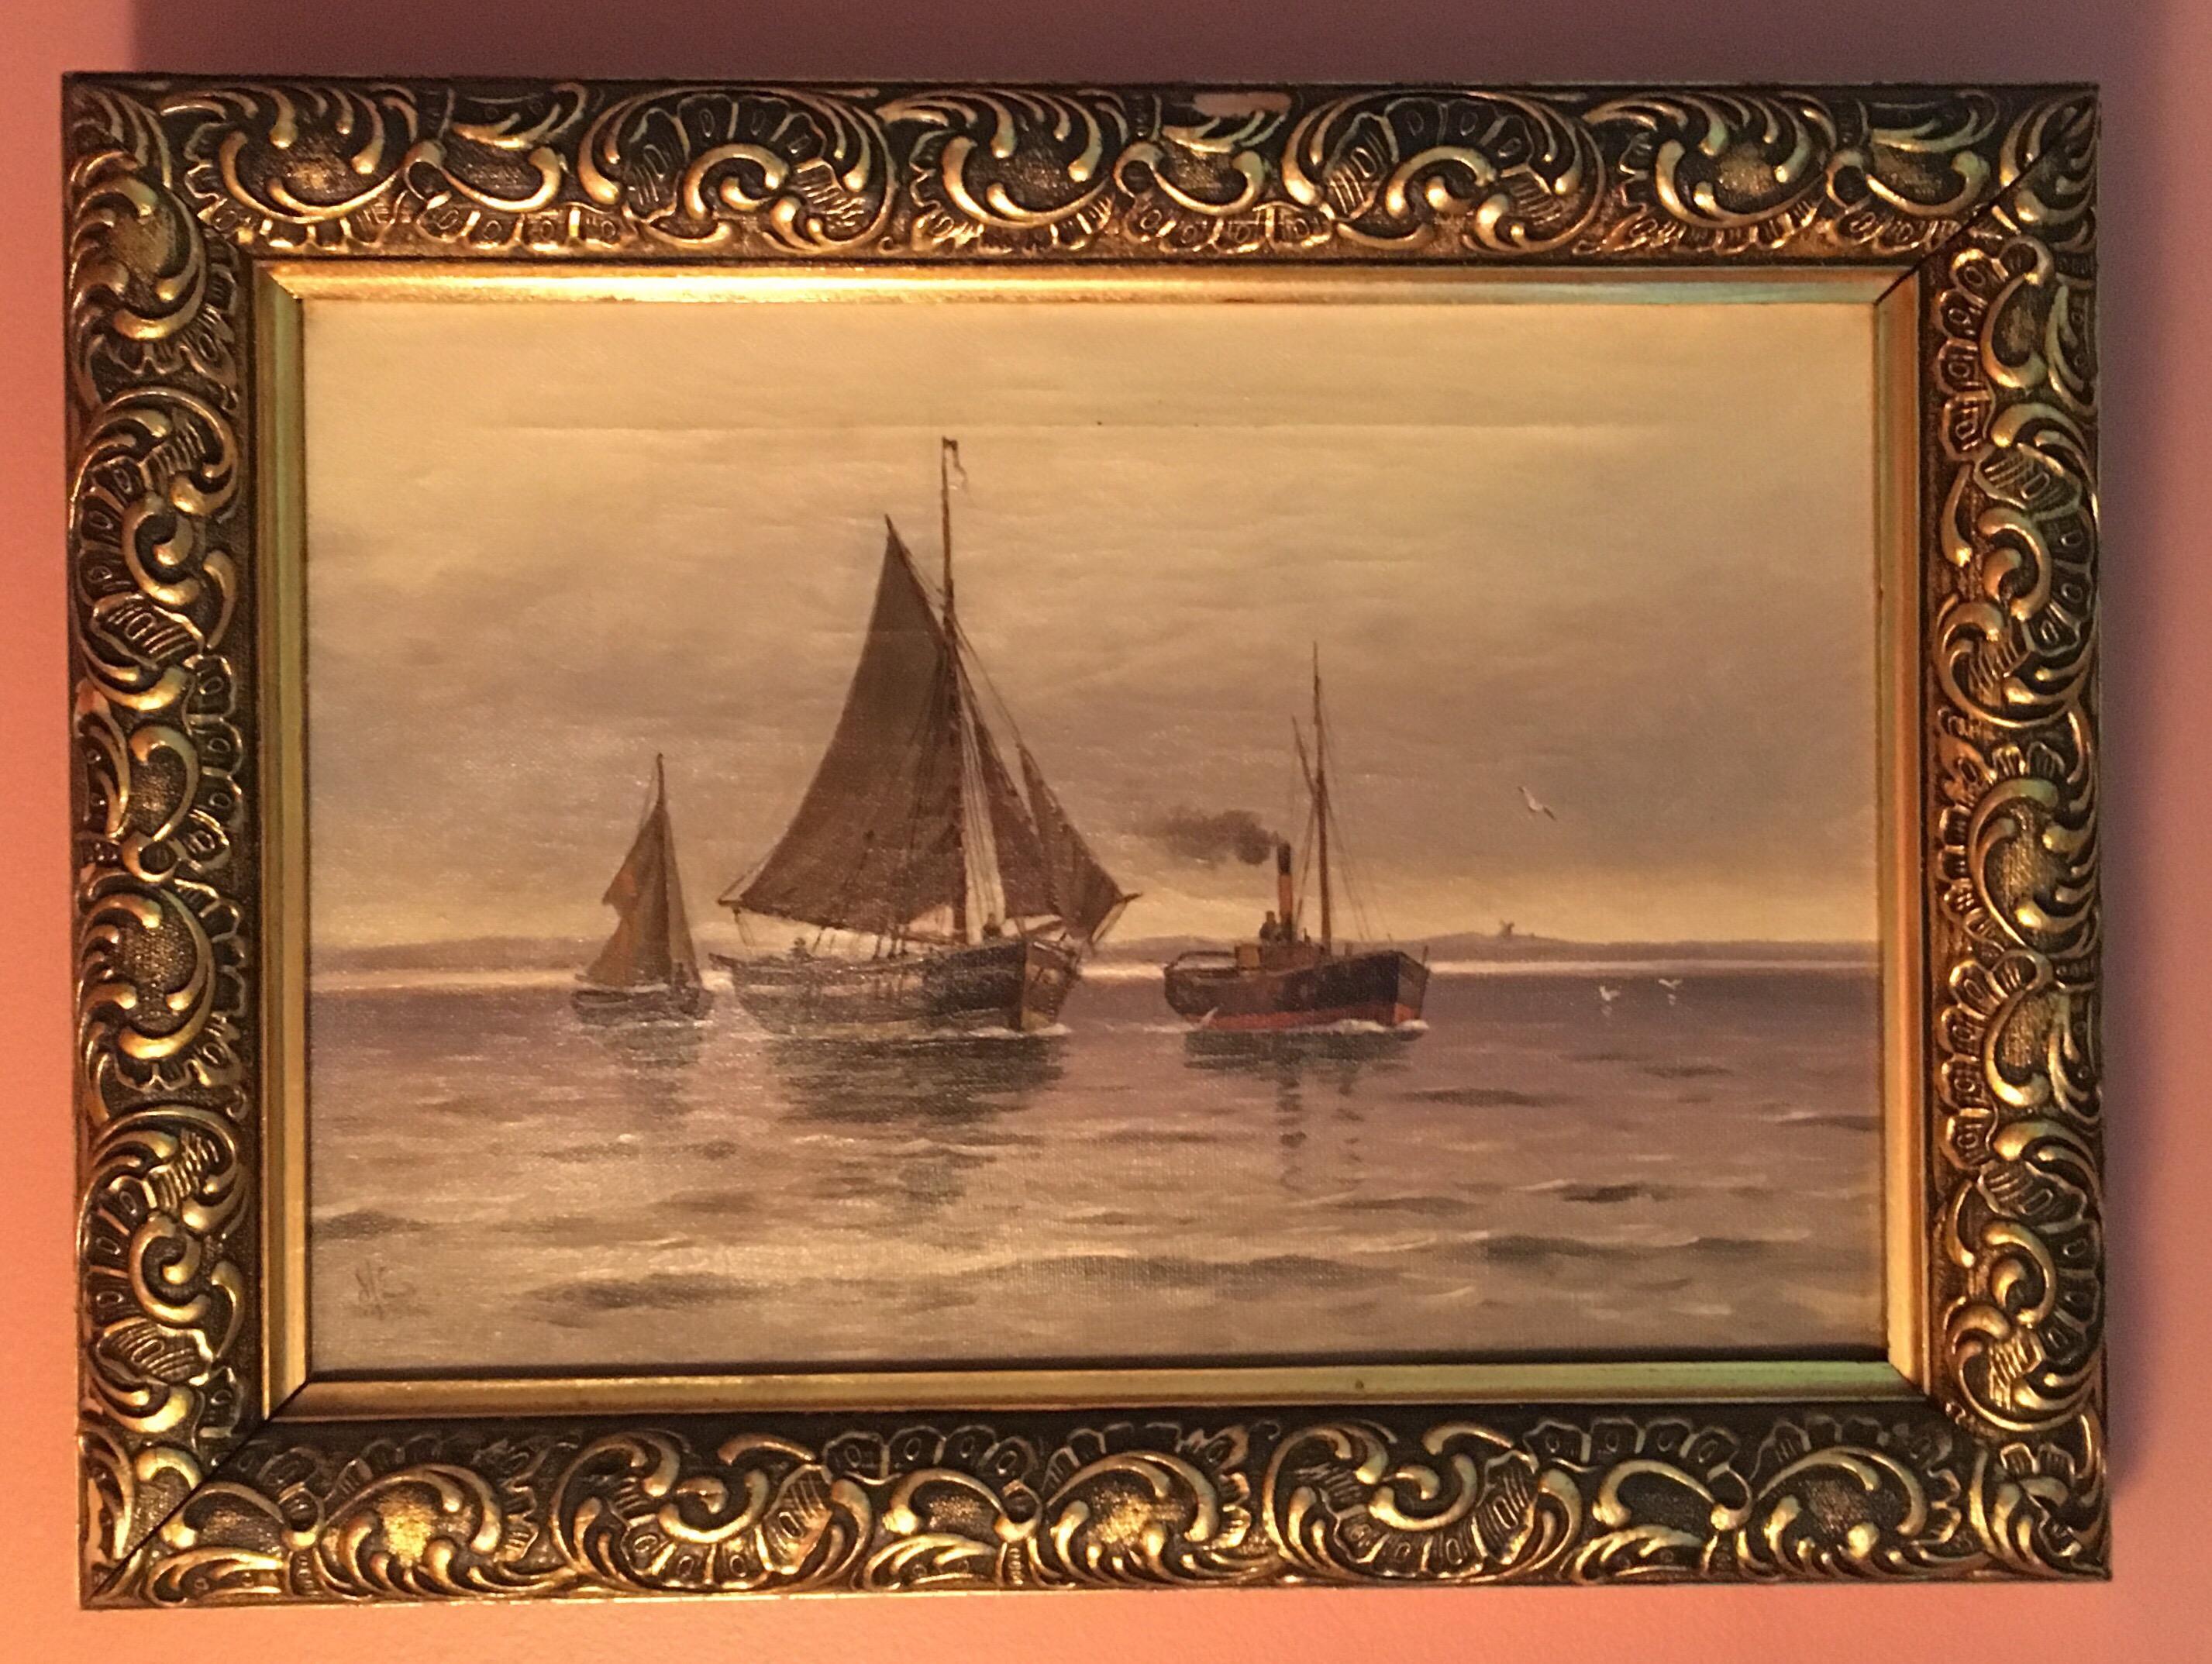 Charming pair of matched seascape paintings, depicting fishing boats sailing and at sunset. Lovely dusky colors and sweet details. Probably late 19th or early 20th century. 

Listed dimensions are for each painting and include frame. Unframed: